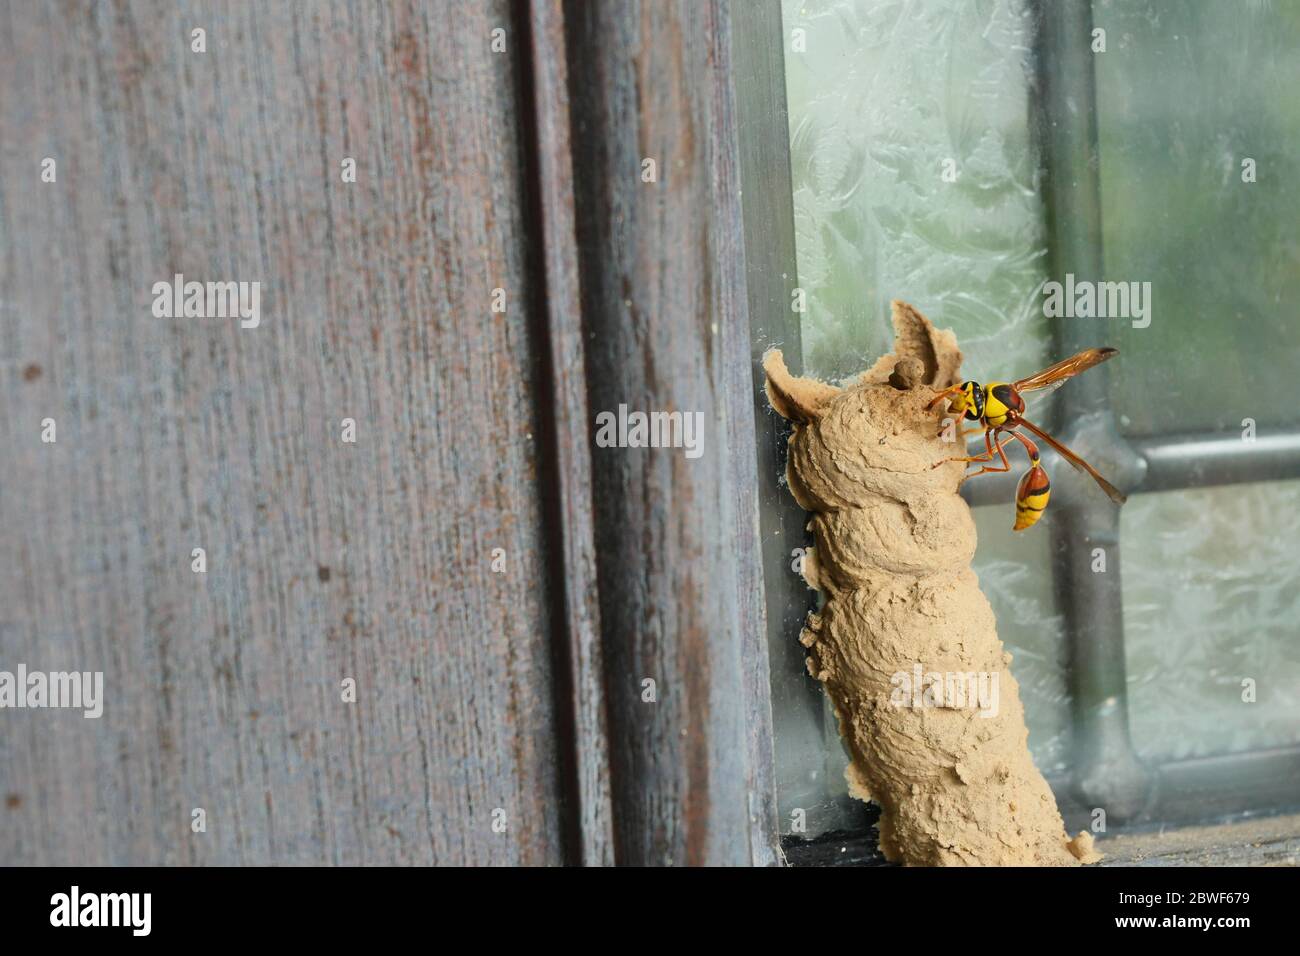 Ceriana wasp building a nest with soil on wooden door, Brown and yellow stripes on tropical insect body in Thailand Stock Photo